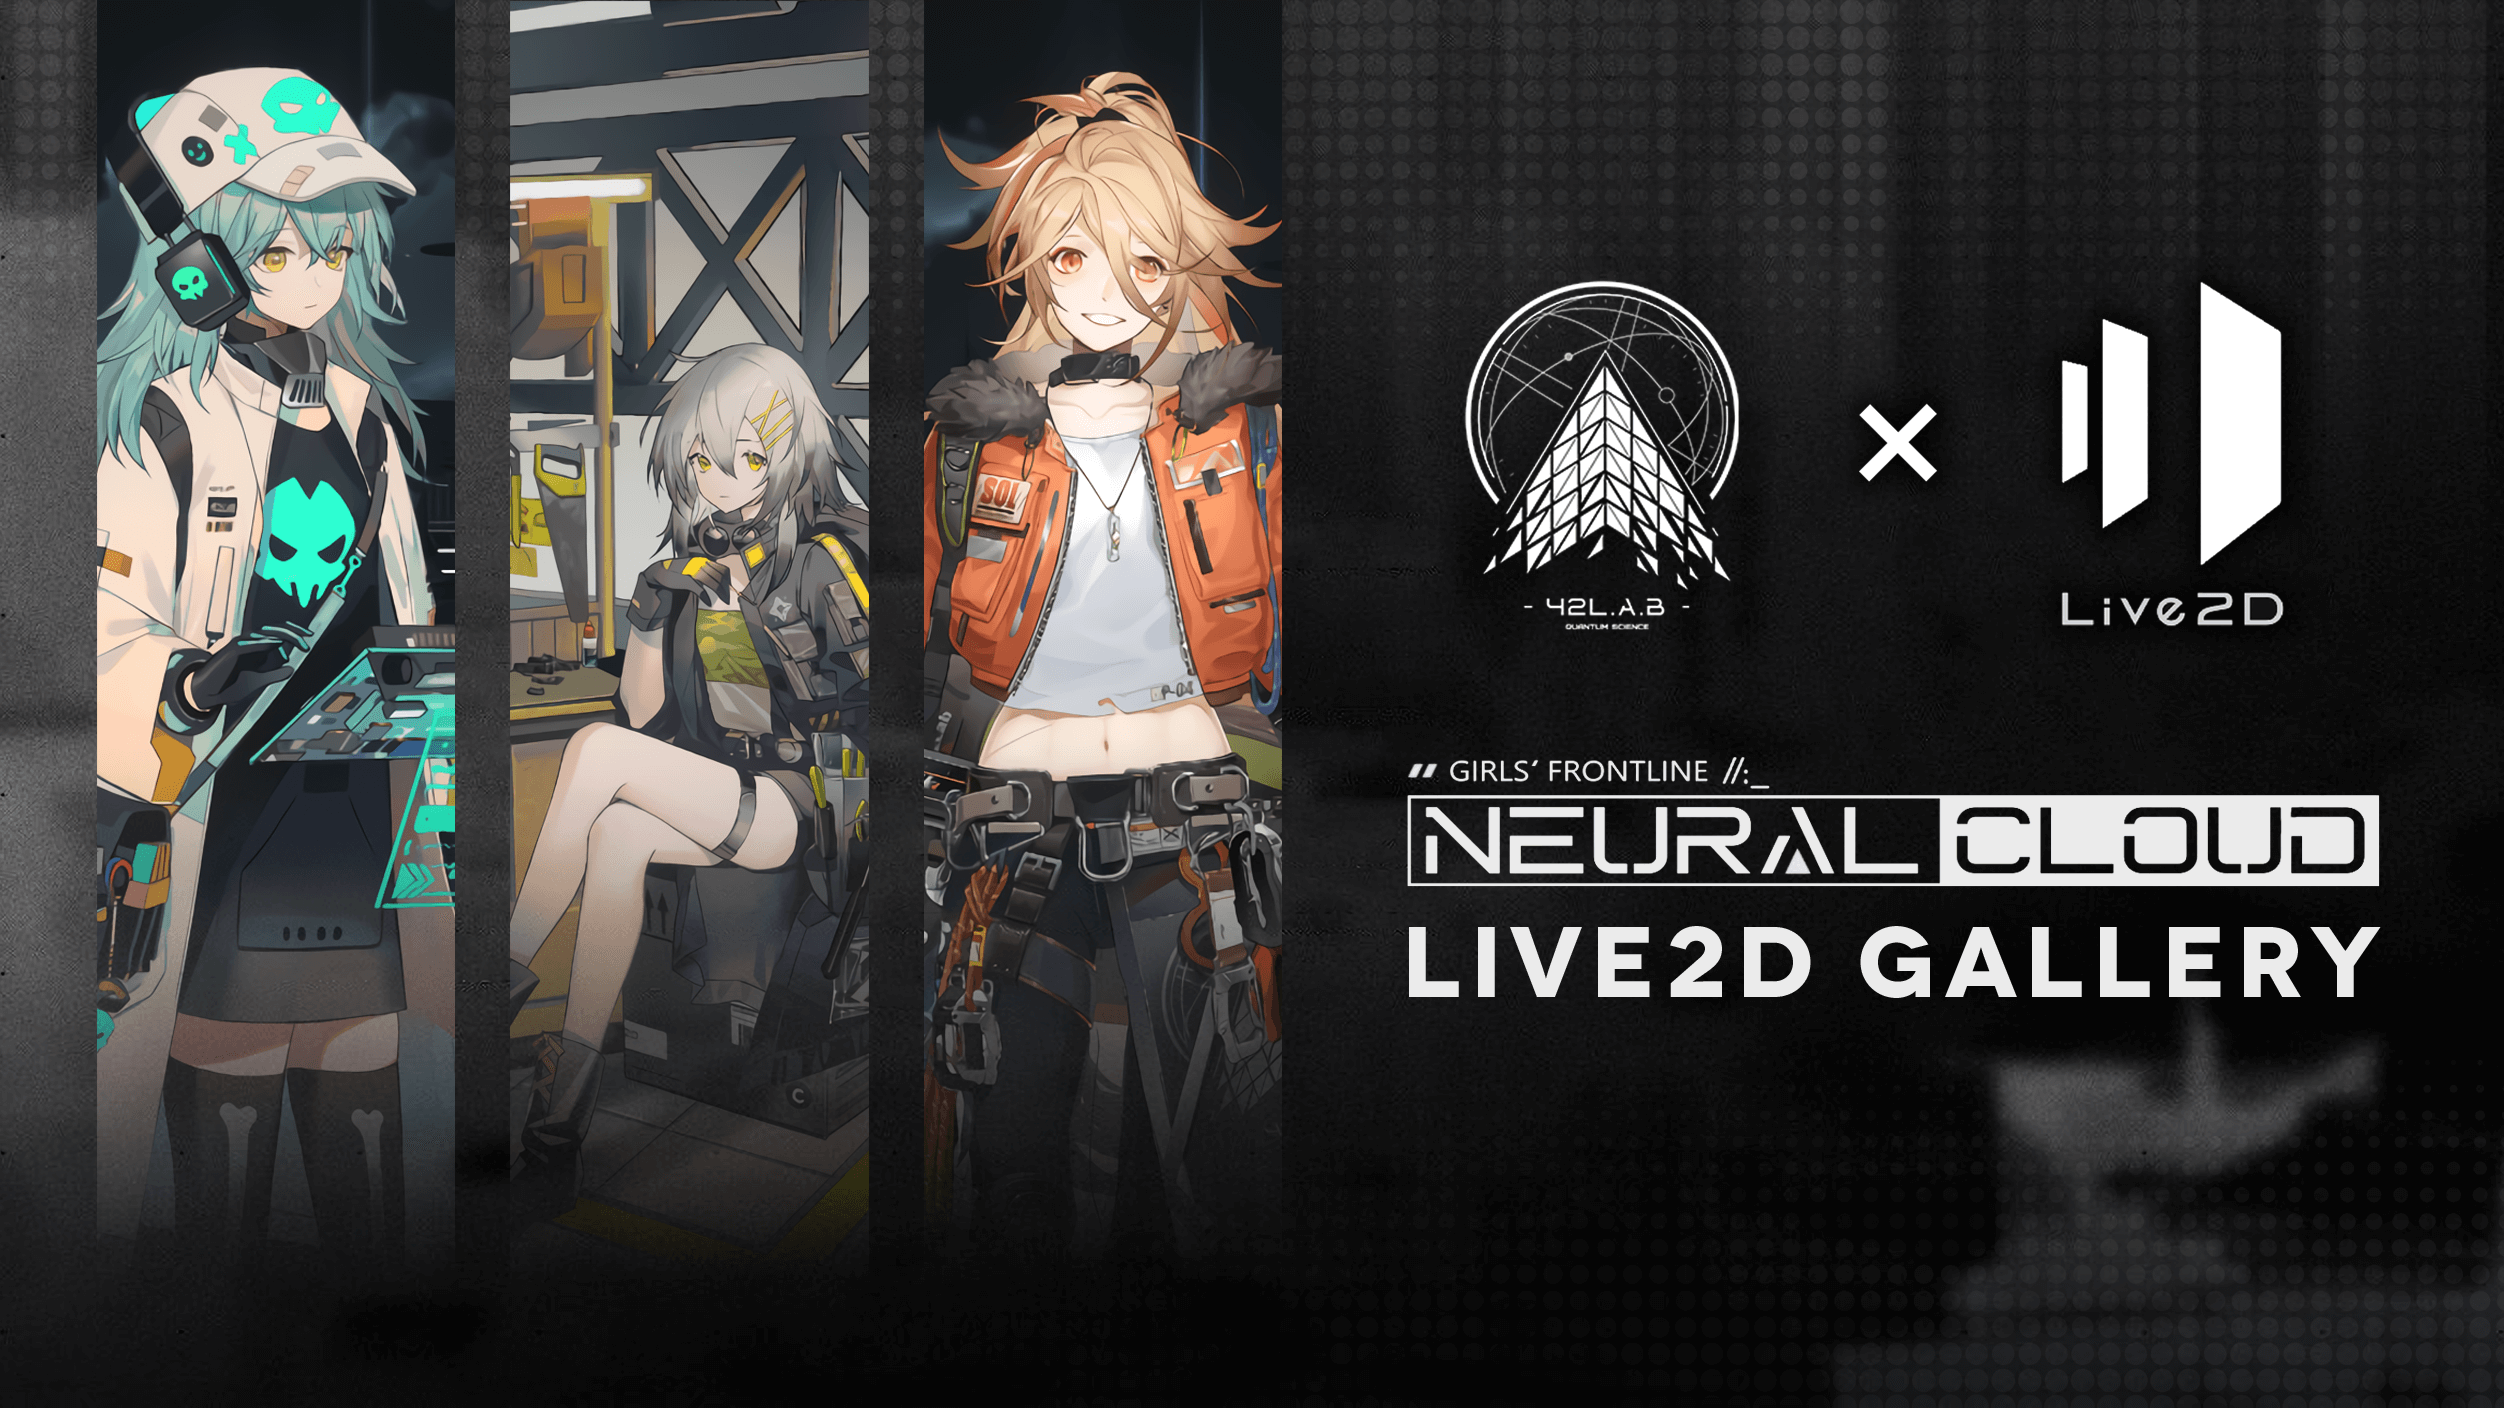 "Project Neural Cloud Live2D Gallery" cover image featuring Sol, Antonina, and Croque